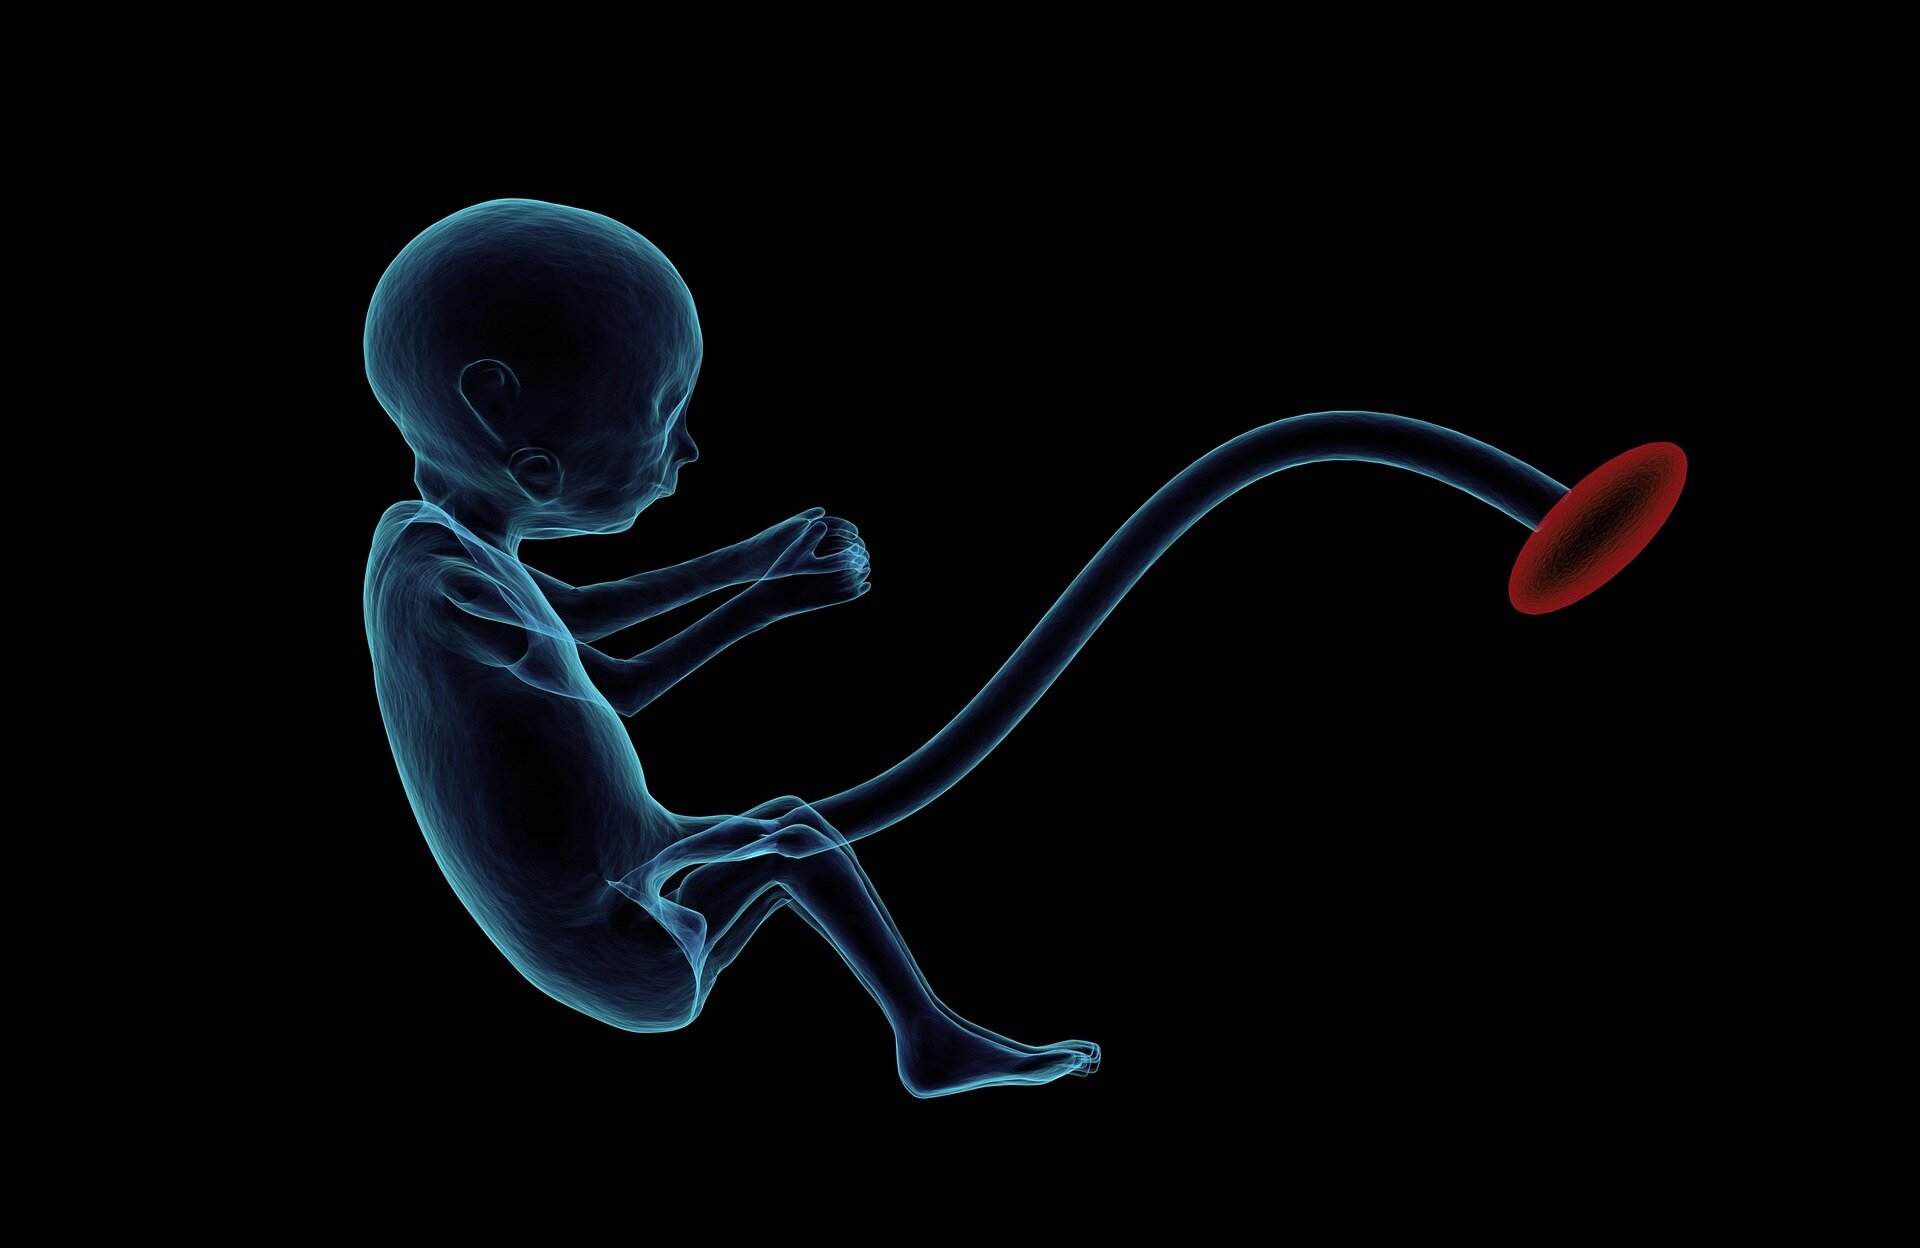 #Babies in the womb react differently to flavours: researchers